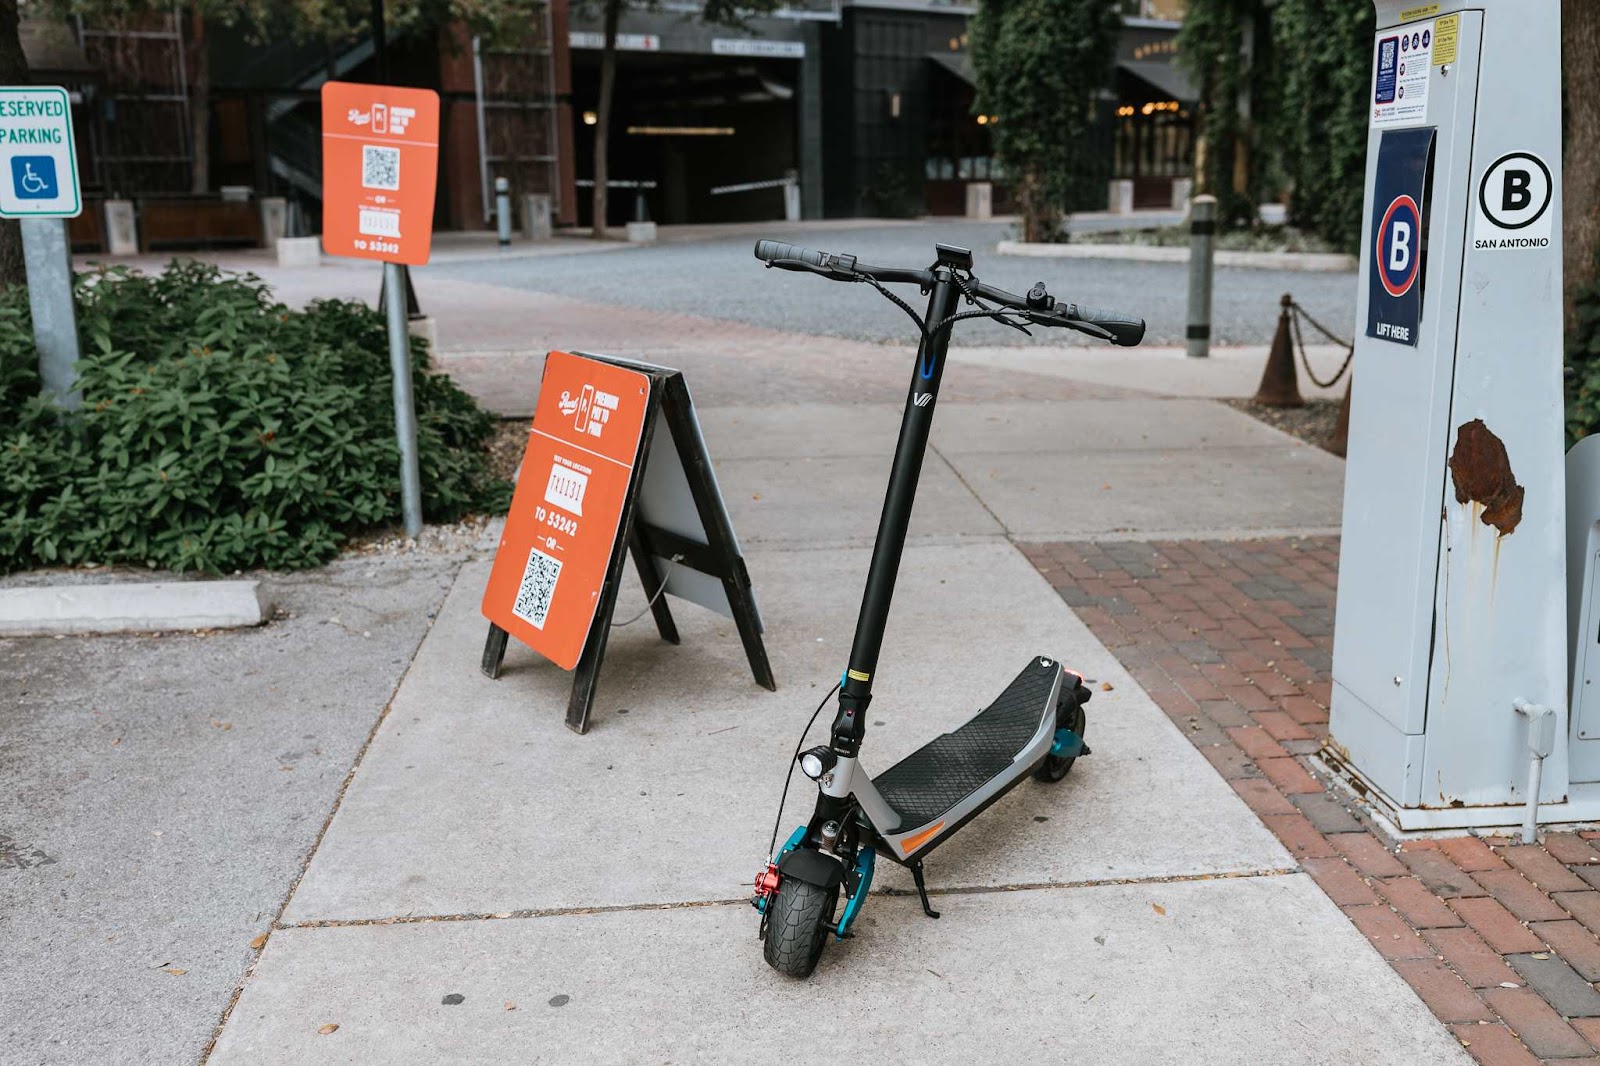 varla commuter electric scooter